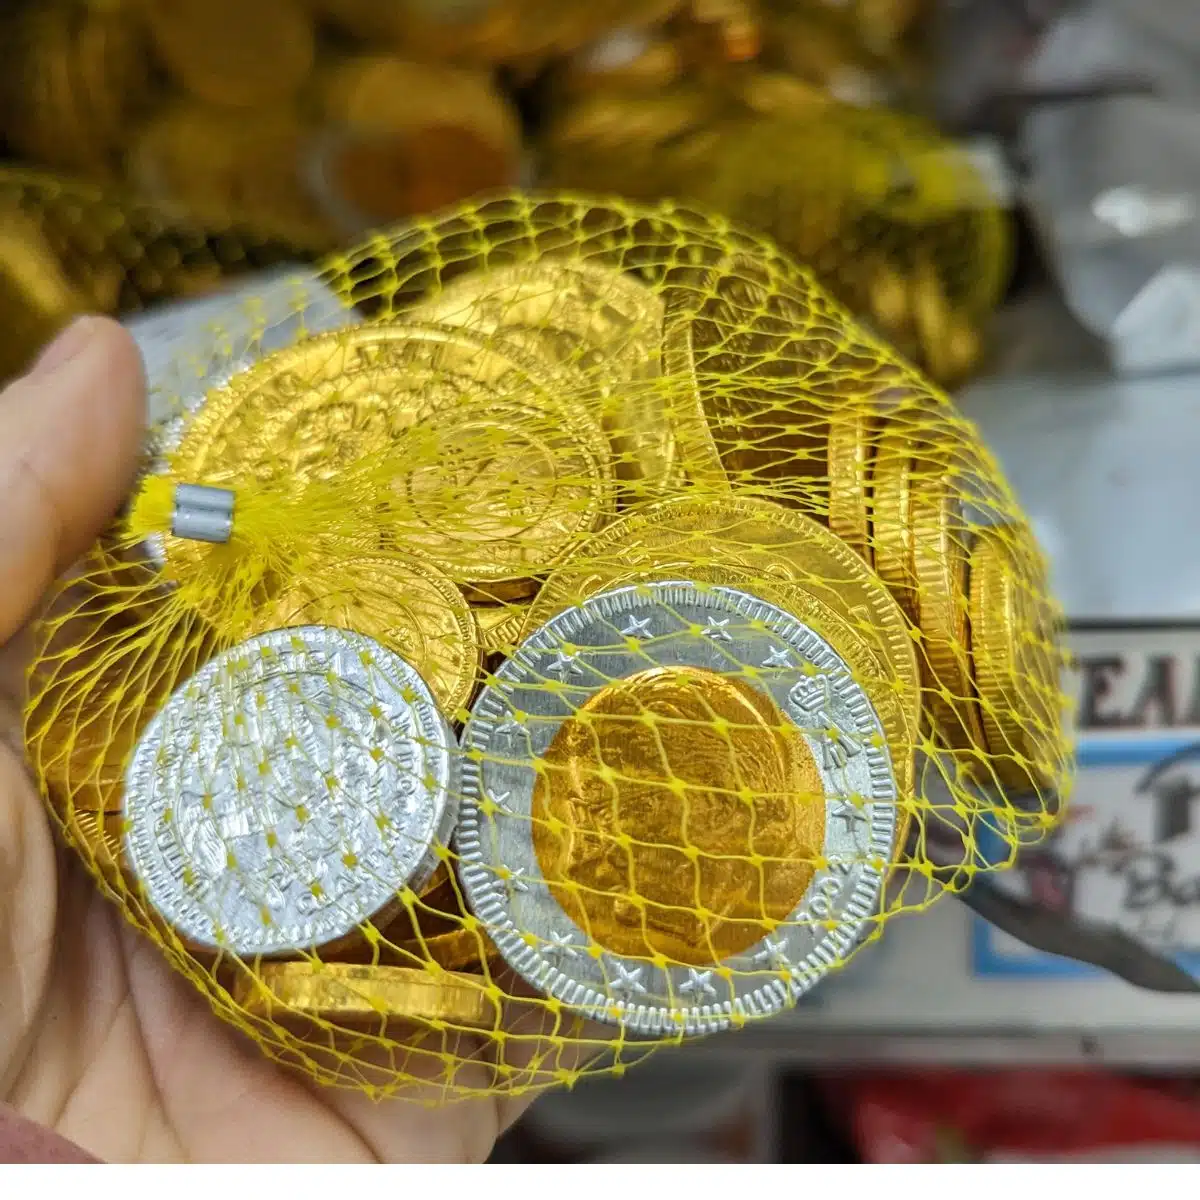 Trader Joes Chocolate Coins